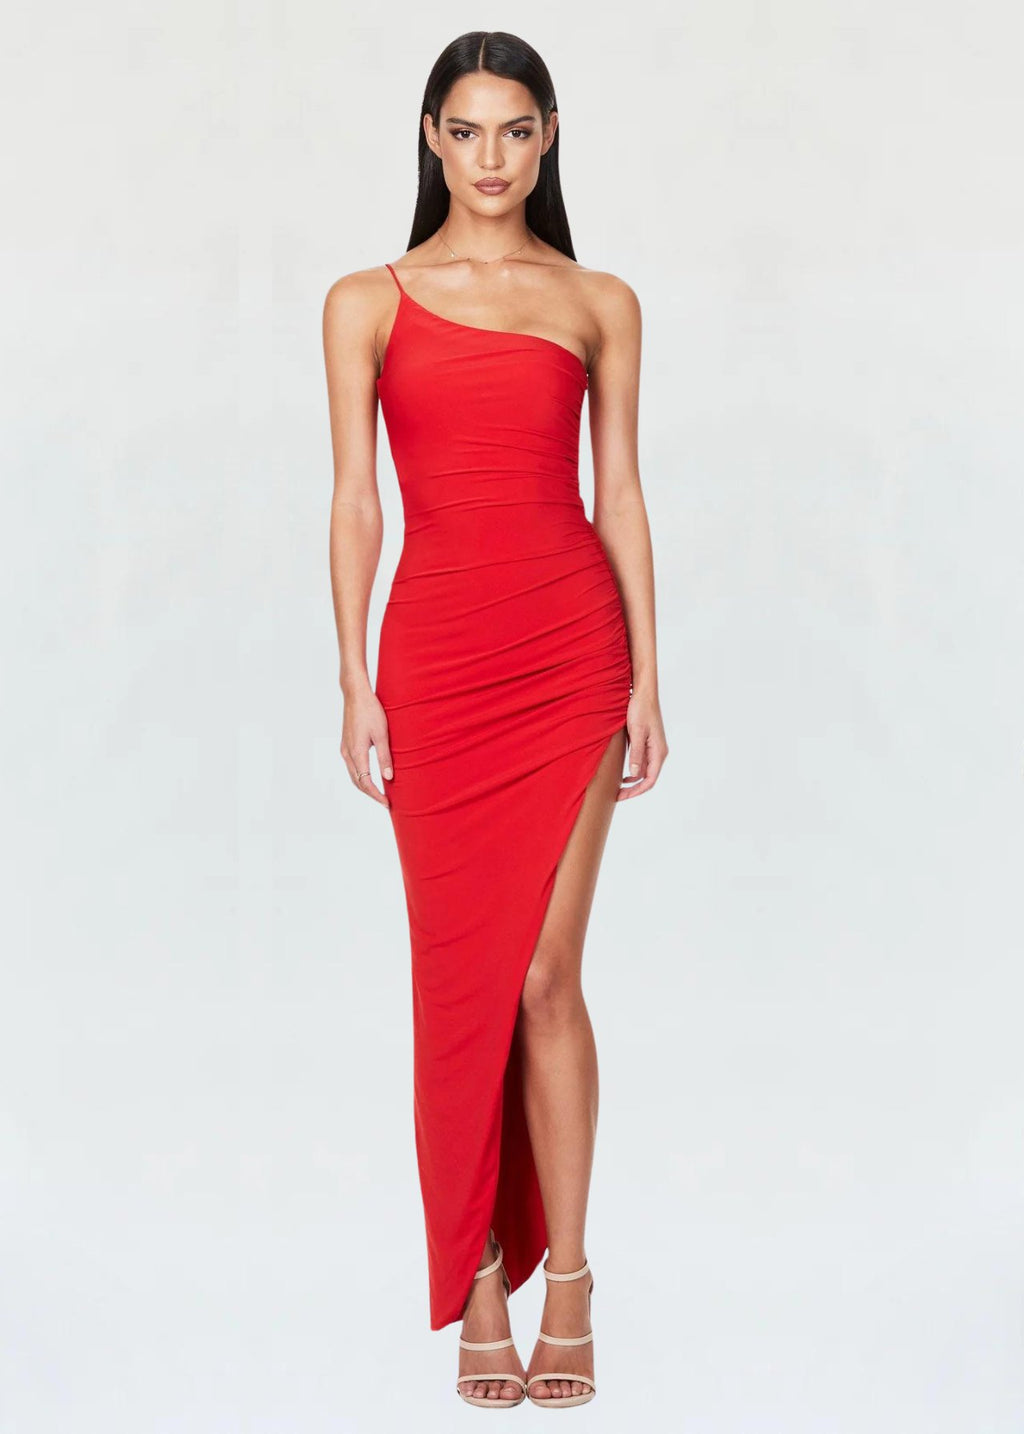 Aria One Shoulder Maxi Dress - Ché by Chelsey